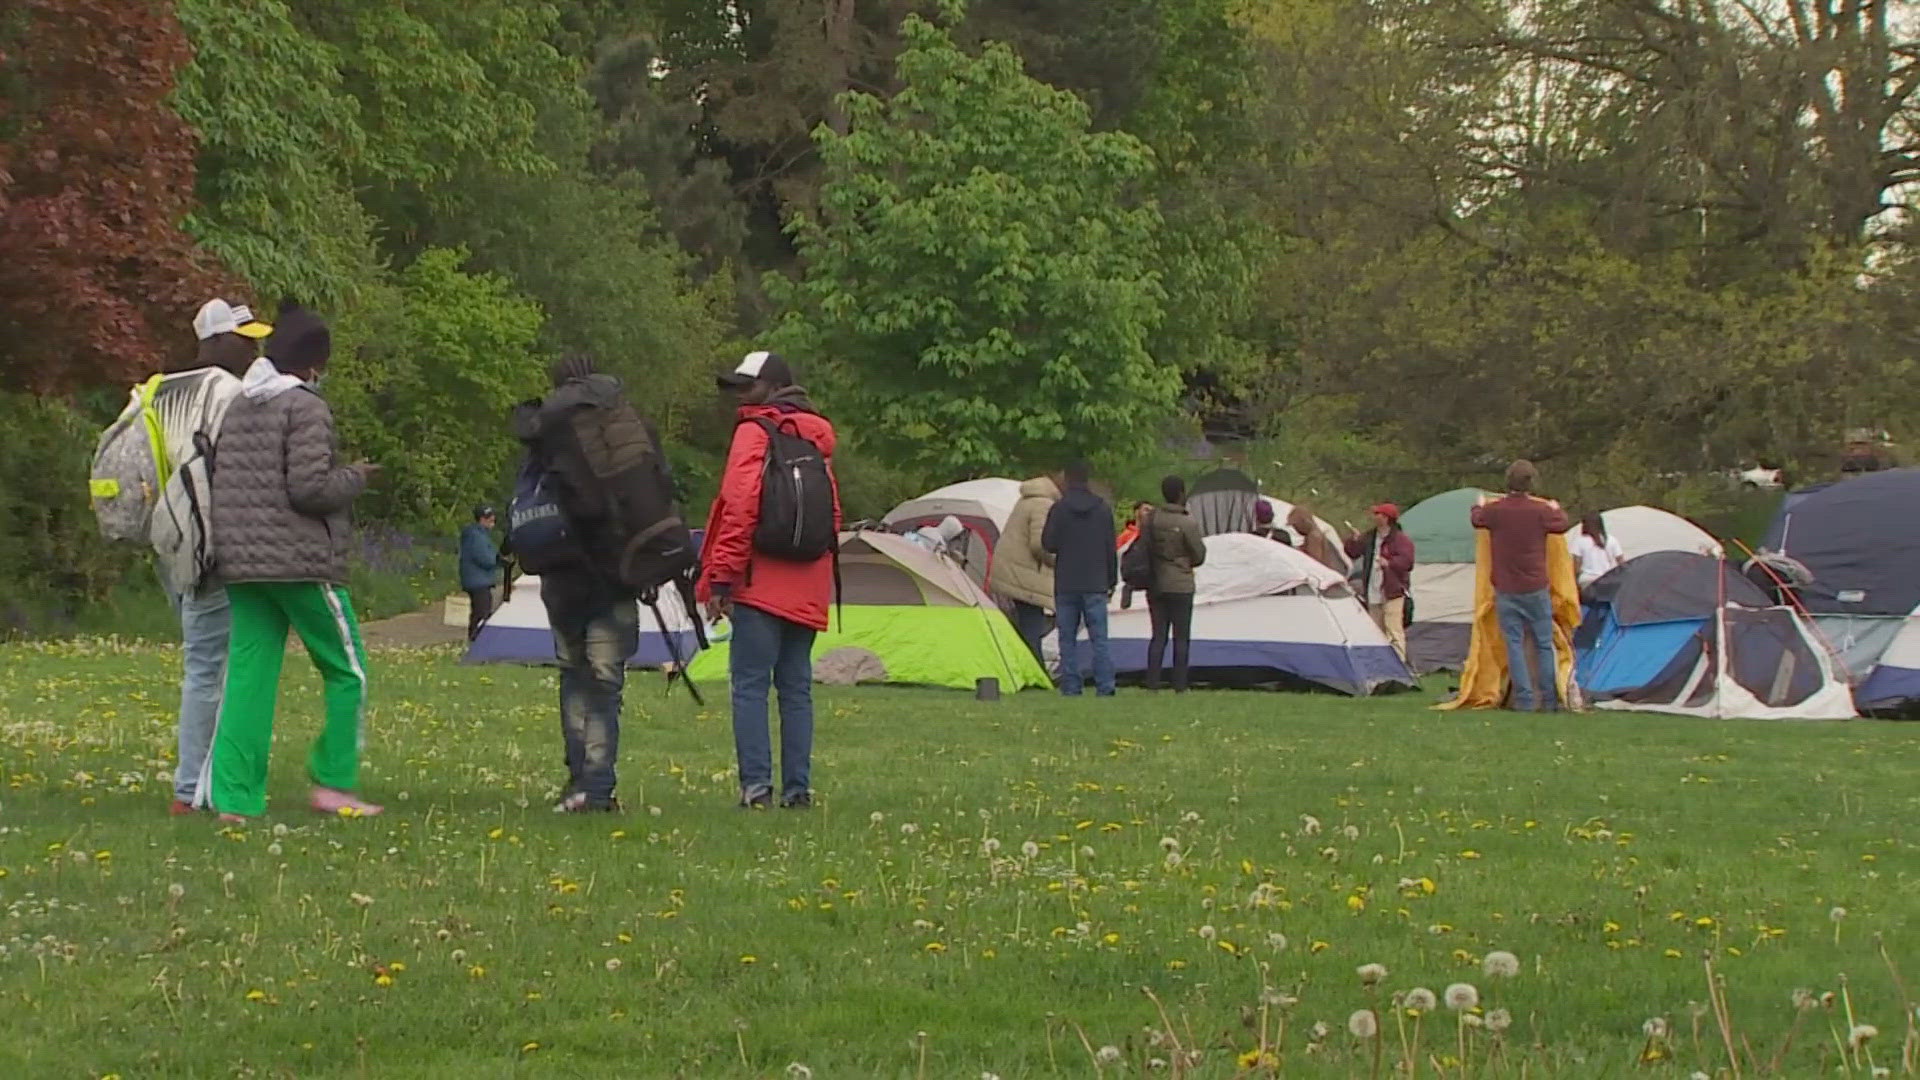 More than 100 asylum seekers, including many children, say they plan to camp in a Seattle park Monday night as hotel funding has run out.